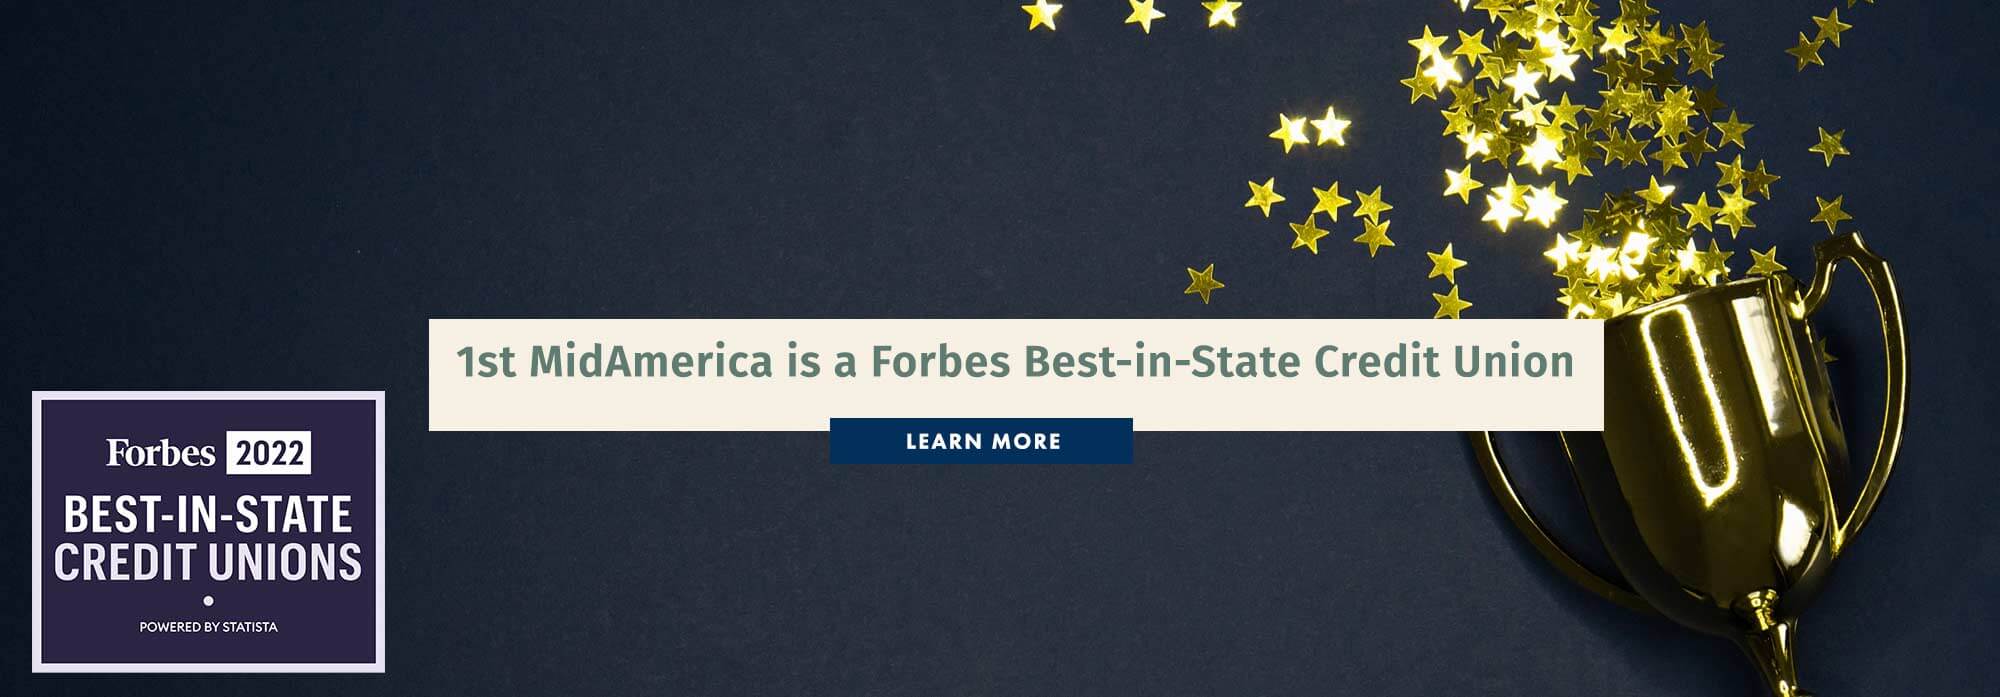 1st MidAmerica is a Forbes Best-in-State Credit Union